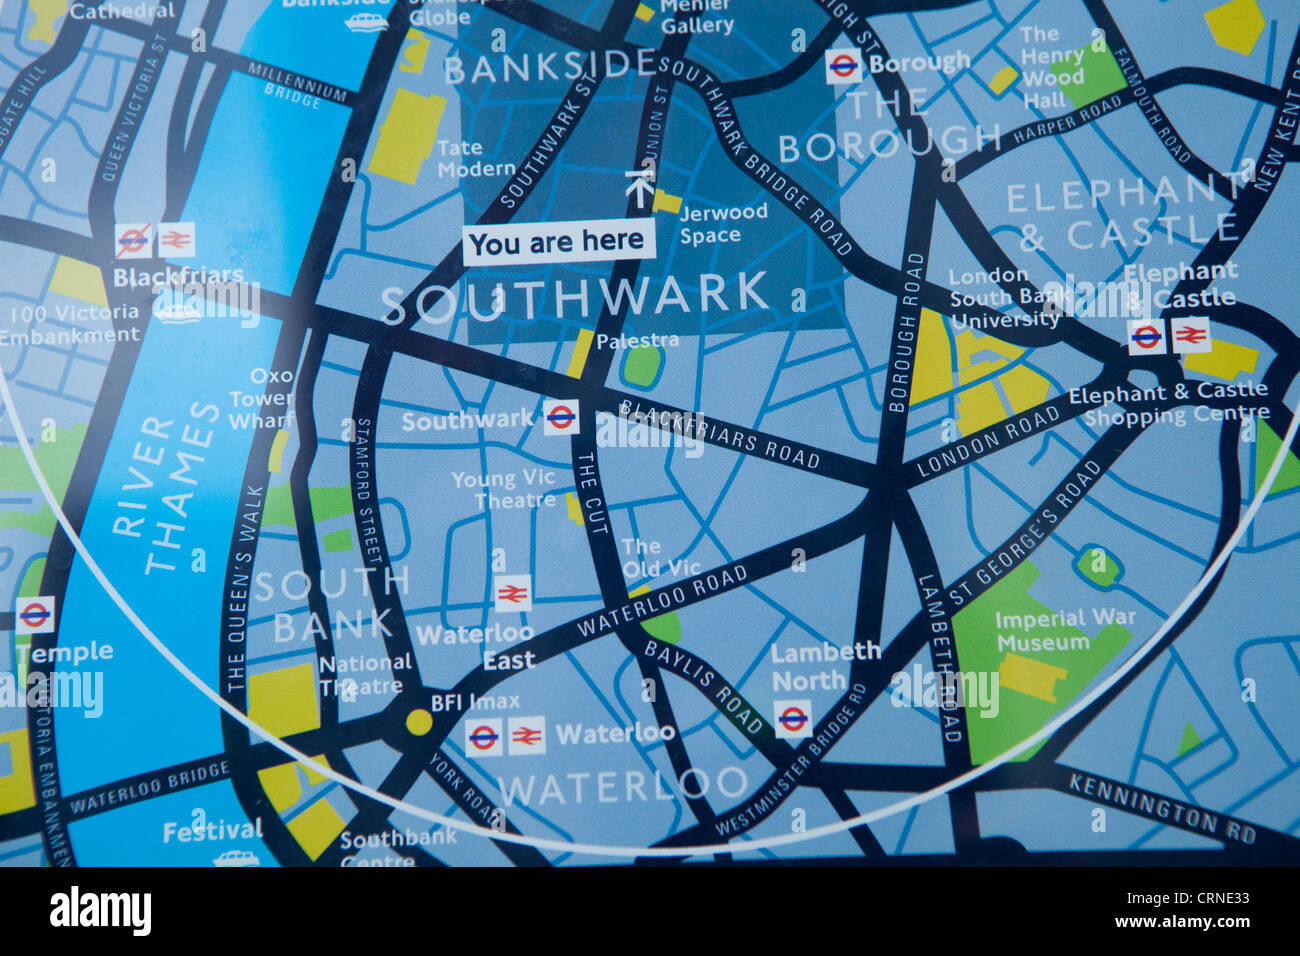 A public street map in the London Borough of Southwark. Stock Photo